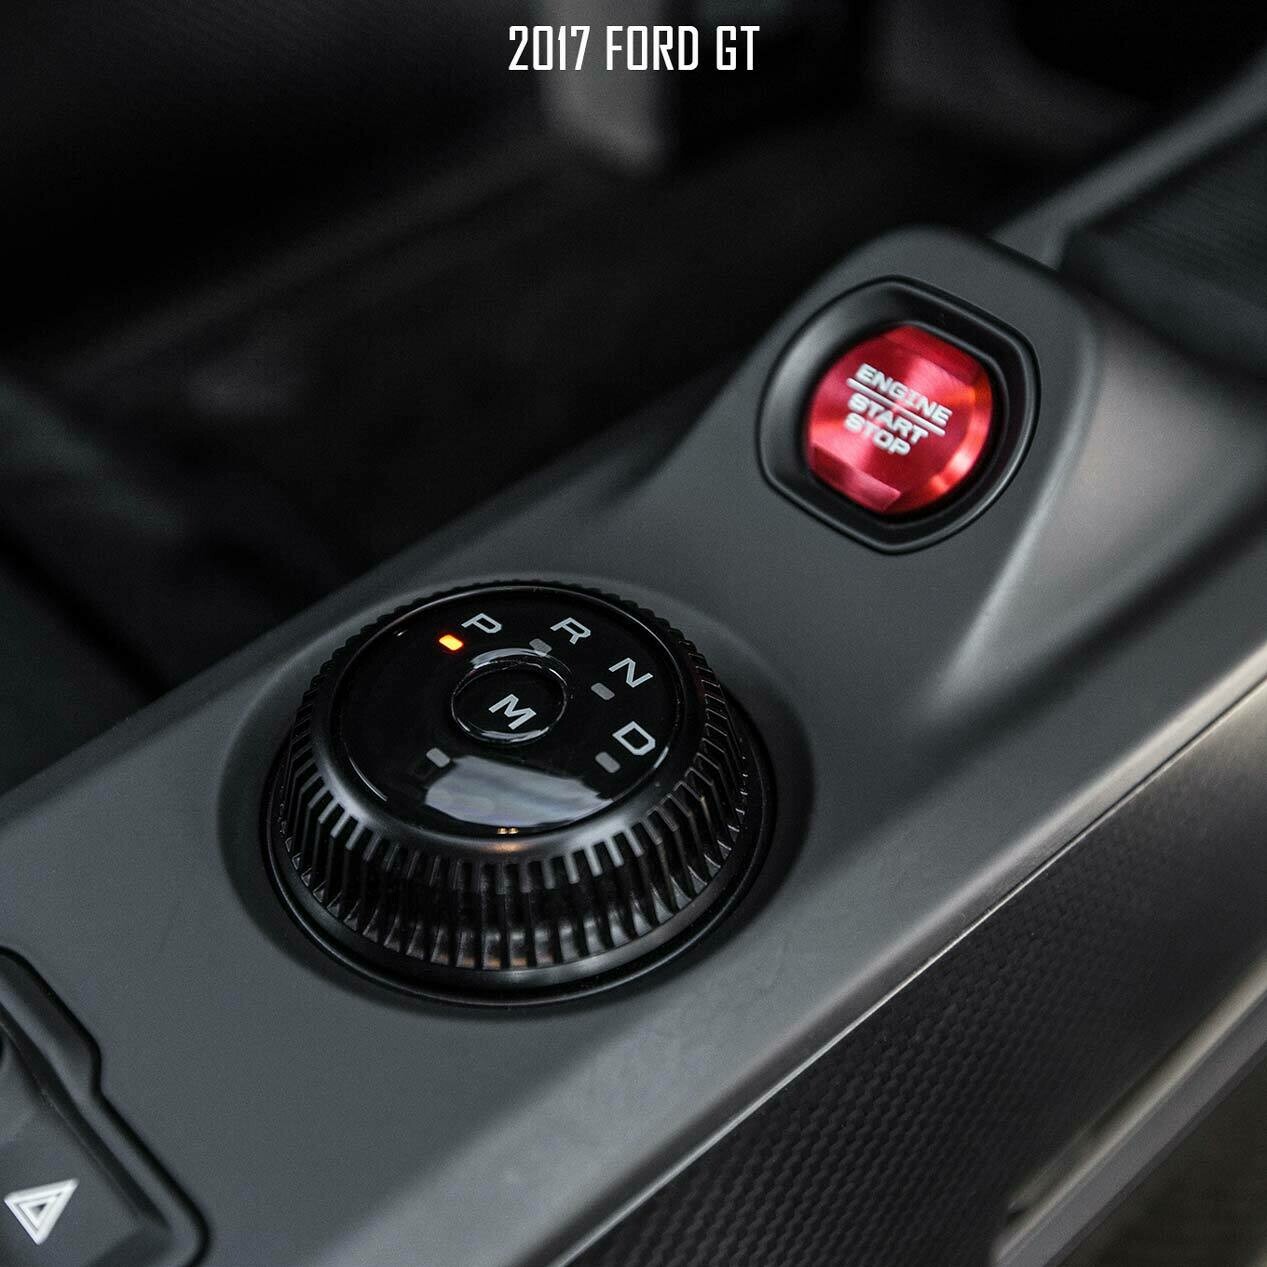 2020 to 2021 Shelby GT500: Metal Start Button